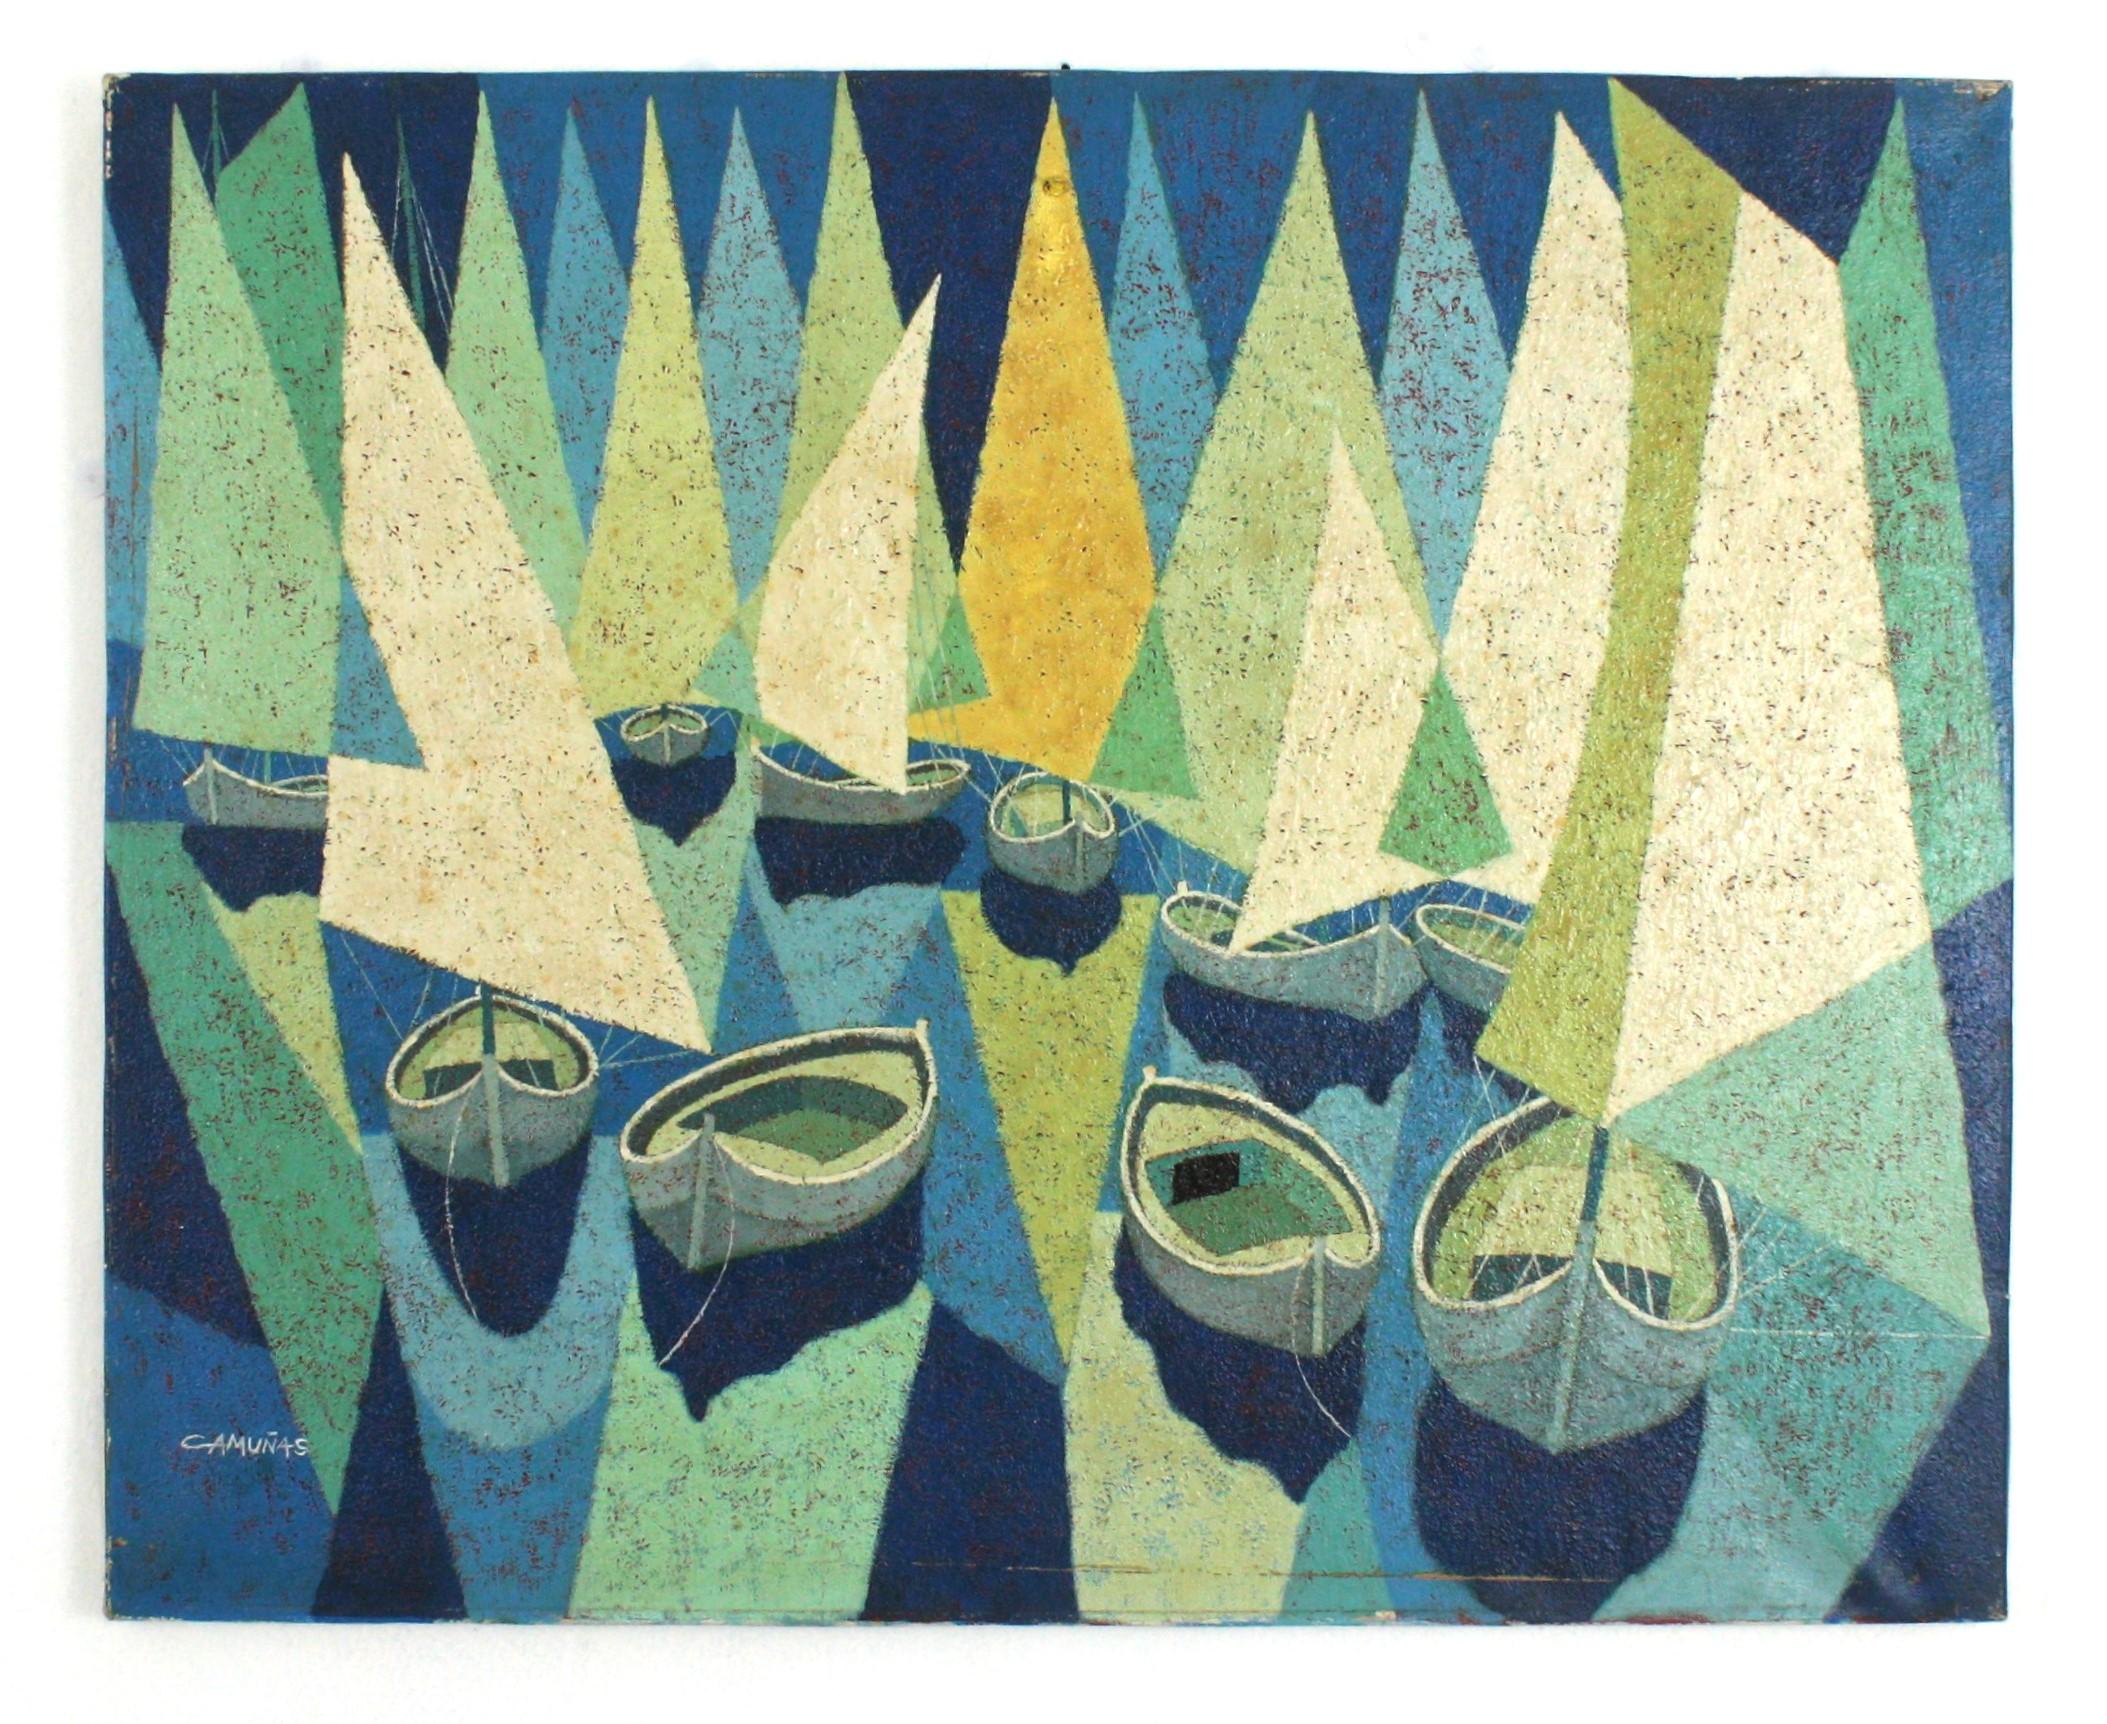 Sailing Boats Spanish Oil on Canvas, 1940s-1950s
Shades of Blue, green, beige and off-white
Oil on canvas, unframed
Signed 'Camuñas' bottom left
Overall measures: 76,5 cm W x 62 cm H x 2 cm D  // 30,11 in W x 24,40 in H x 0,78 in D